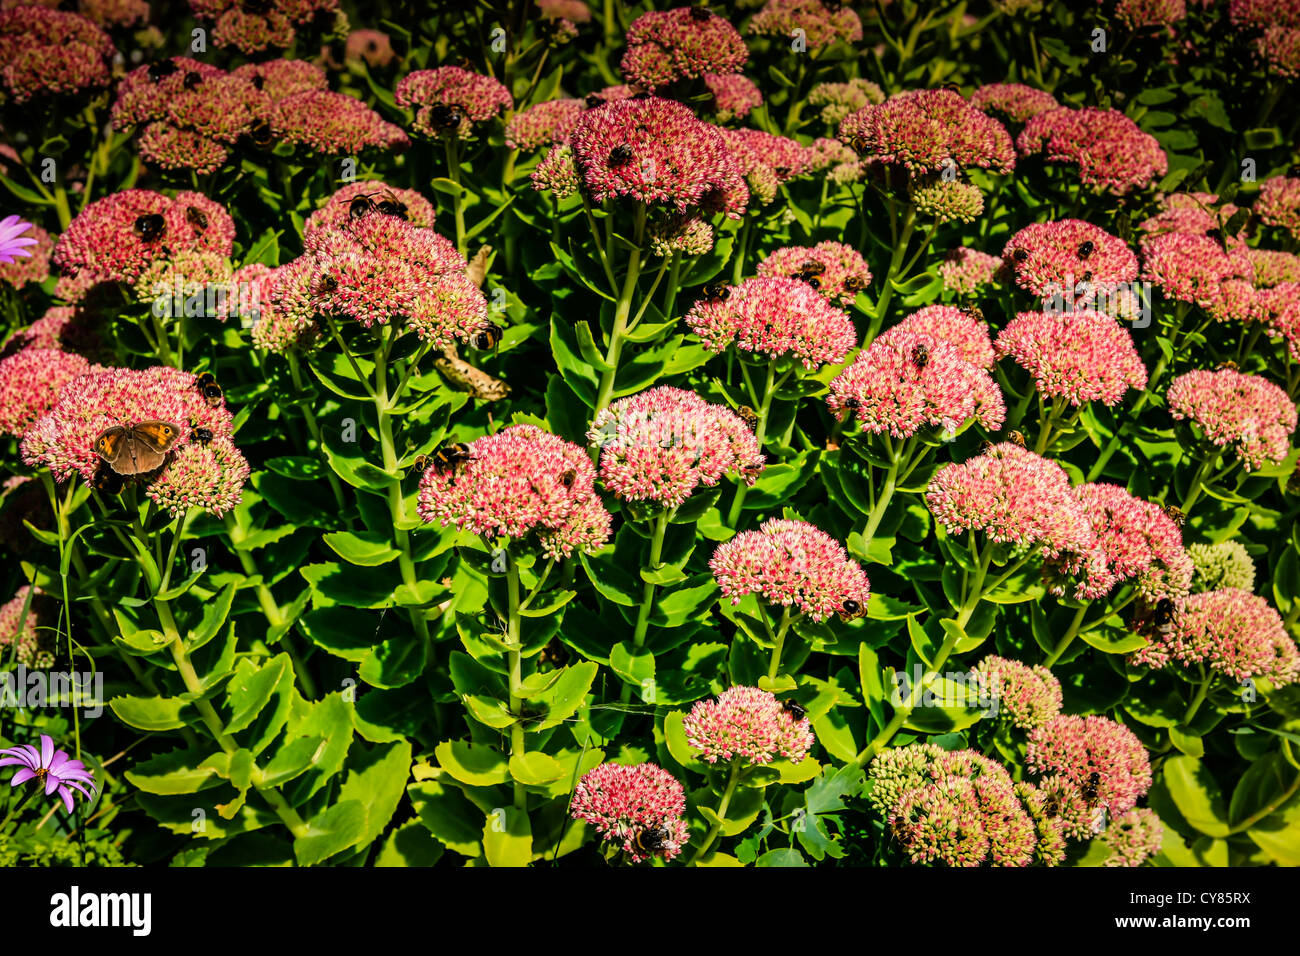 Sedum or Stonecrop flowers covered with honey bees Stock Photo